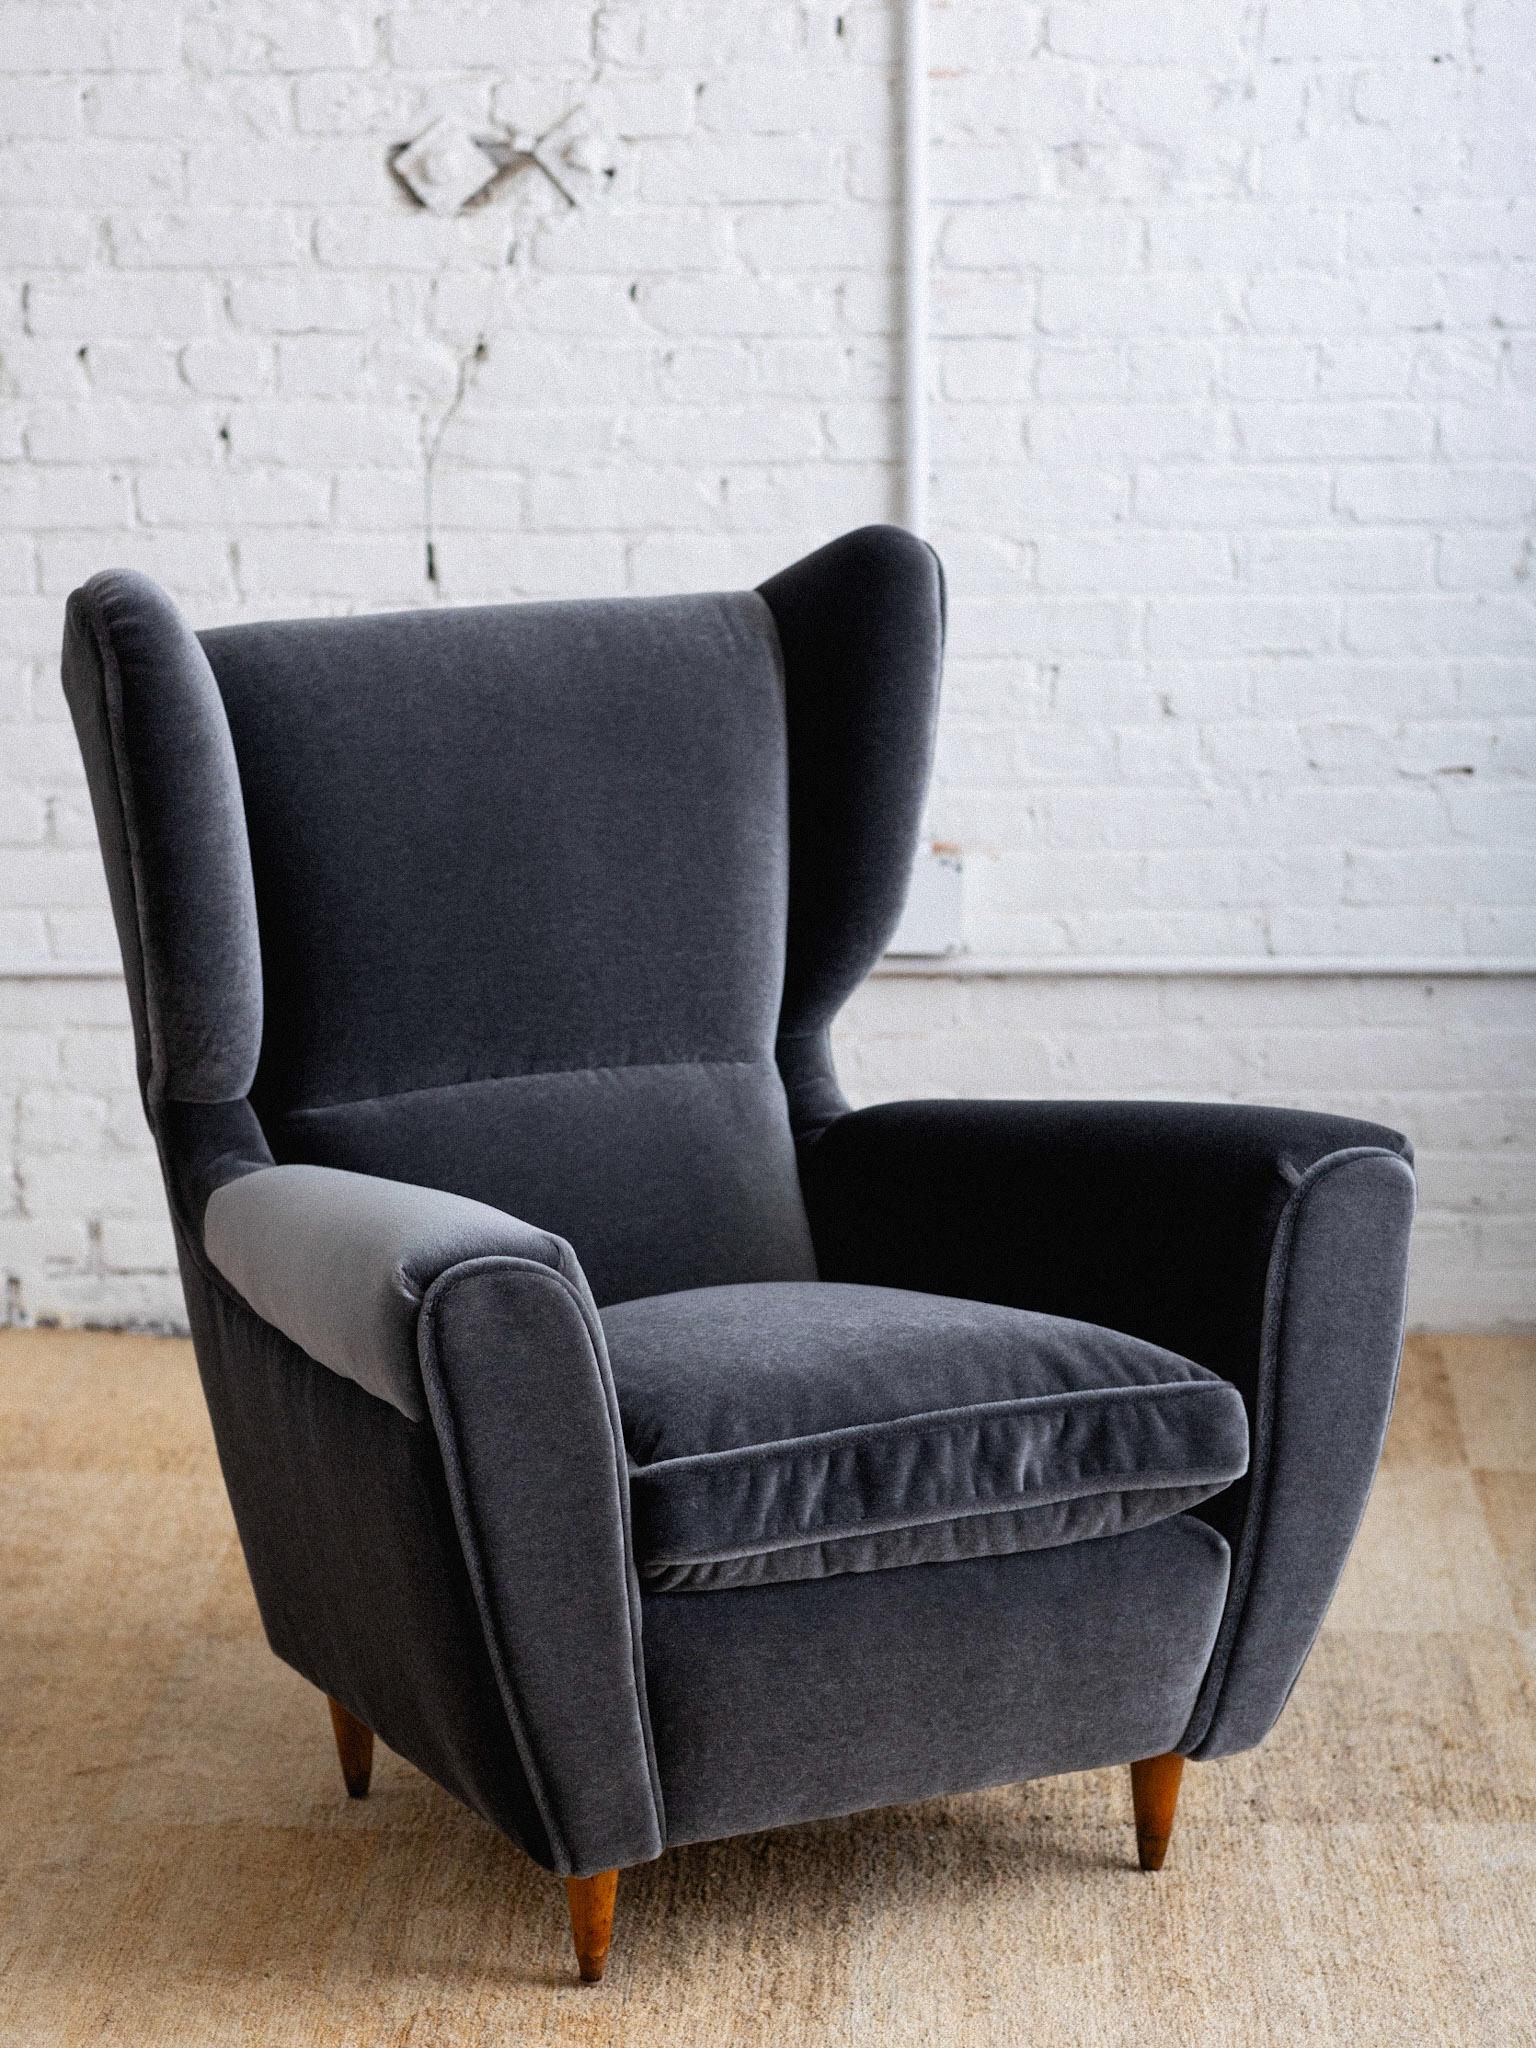 A mid century Italian armchair attributed to Melchiorre Bega. Wingback silhouette. Newly upholstered in a high pile plush grey mohair. Down seat cushion. Original wood feet. Sourced in Northern Italy. Pair available, sold individually.